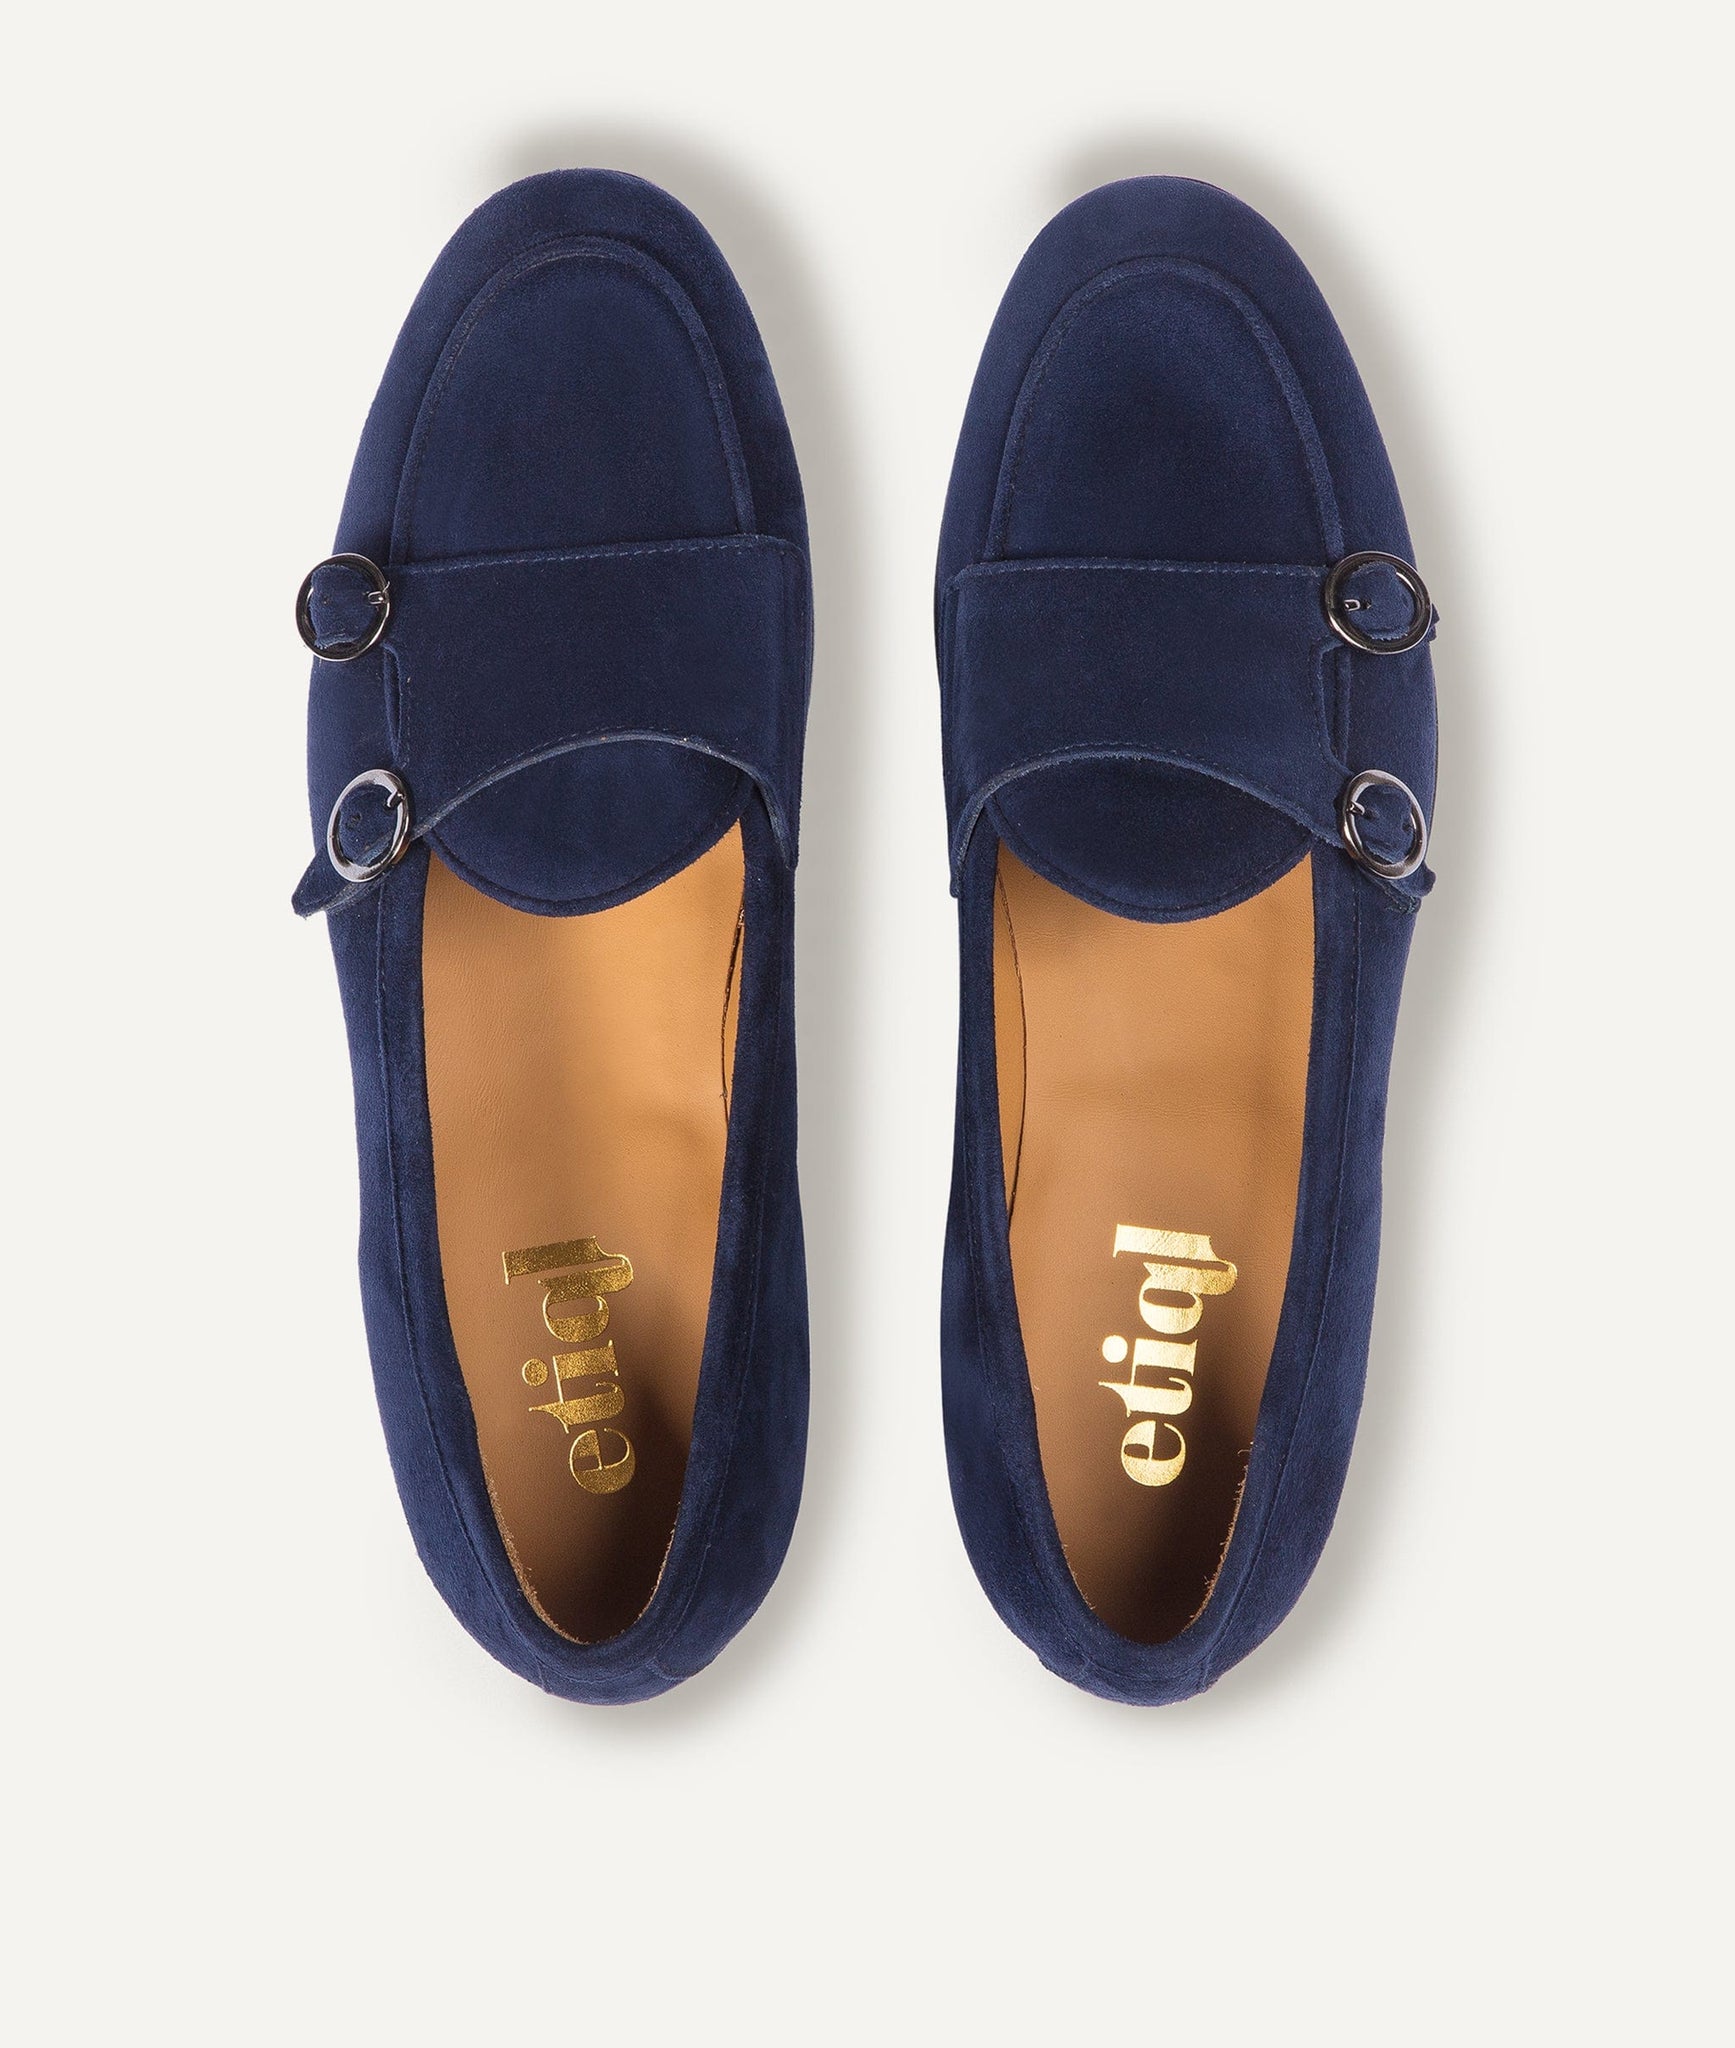 Monk Loafer in Suede